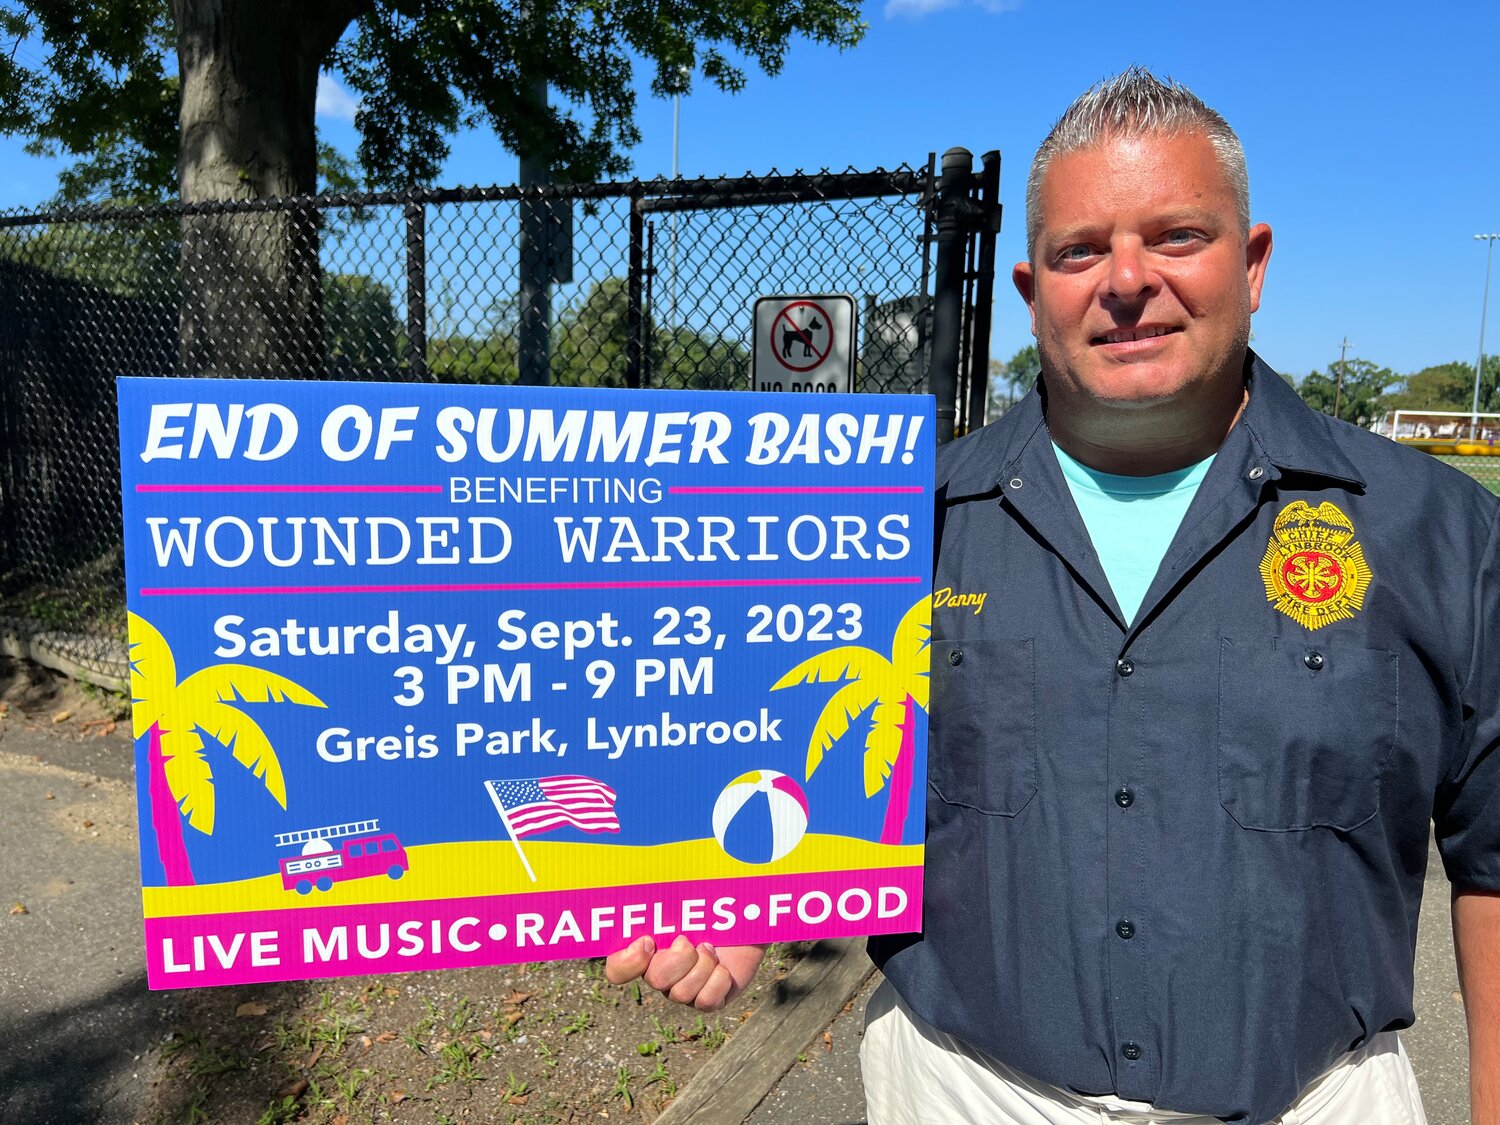 Lynbrook Fire Chief Danny Ambrosio with a lawn sign promoting the Lynbrook Fire Department’s fundraiser for Wounded Warriors on Sept. 23 at Greis Park.